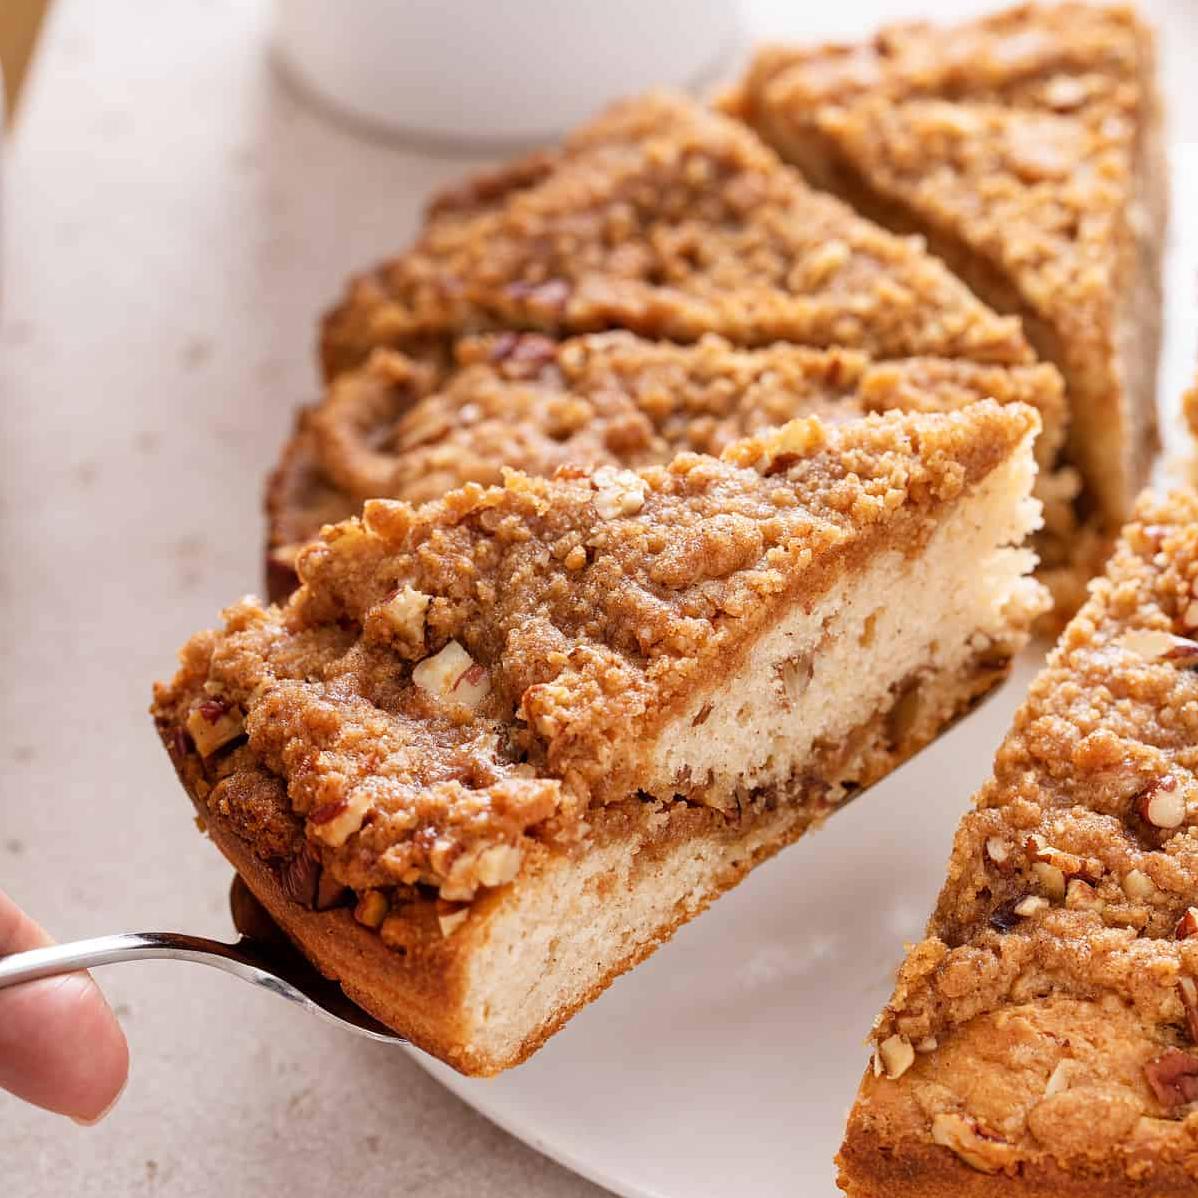  Don't have much time? This Bisquick coffee cake is quick and easy to make.